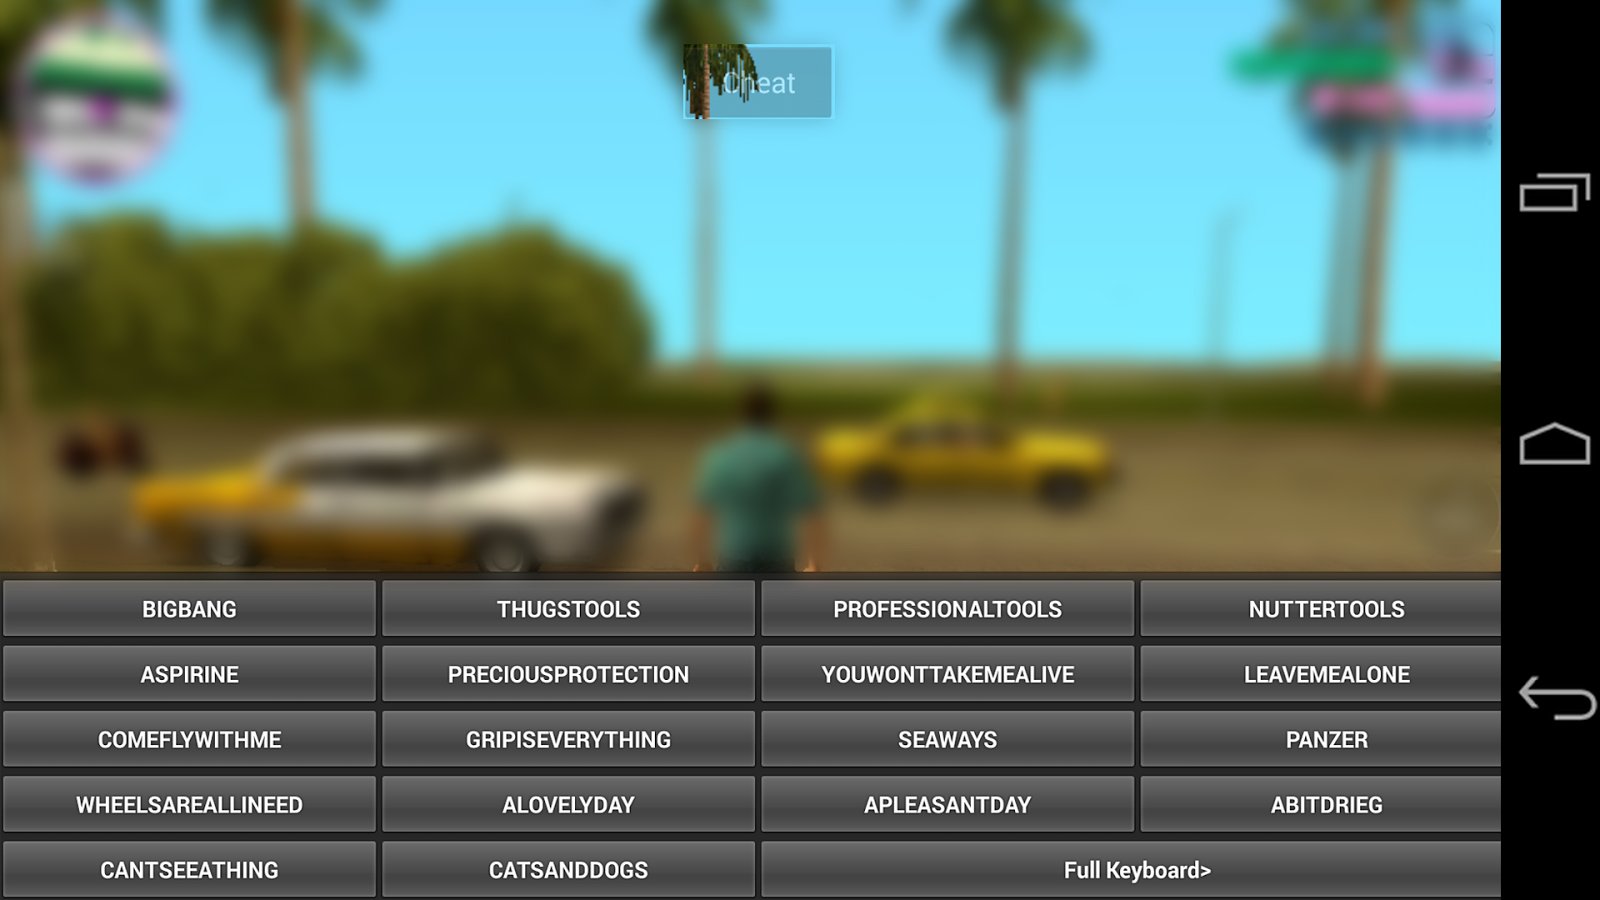 Gta vice city apk free download for android phone windows 10